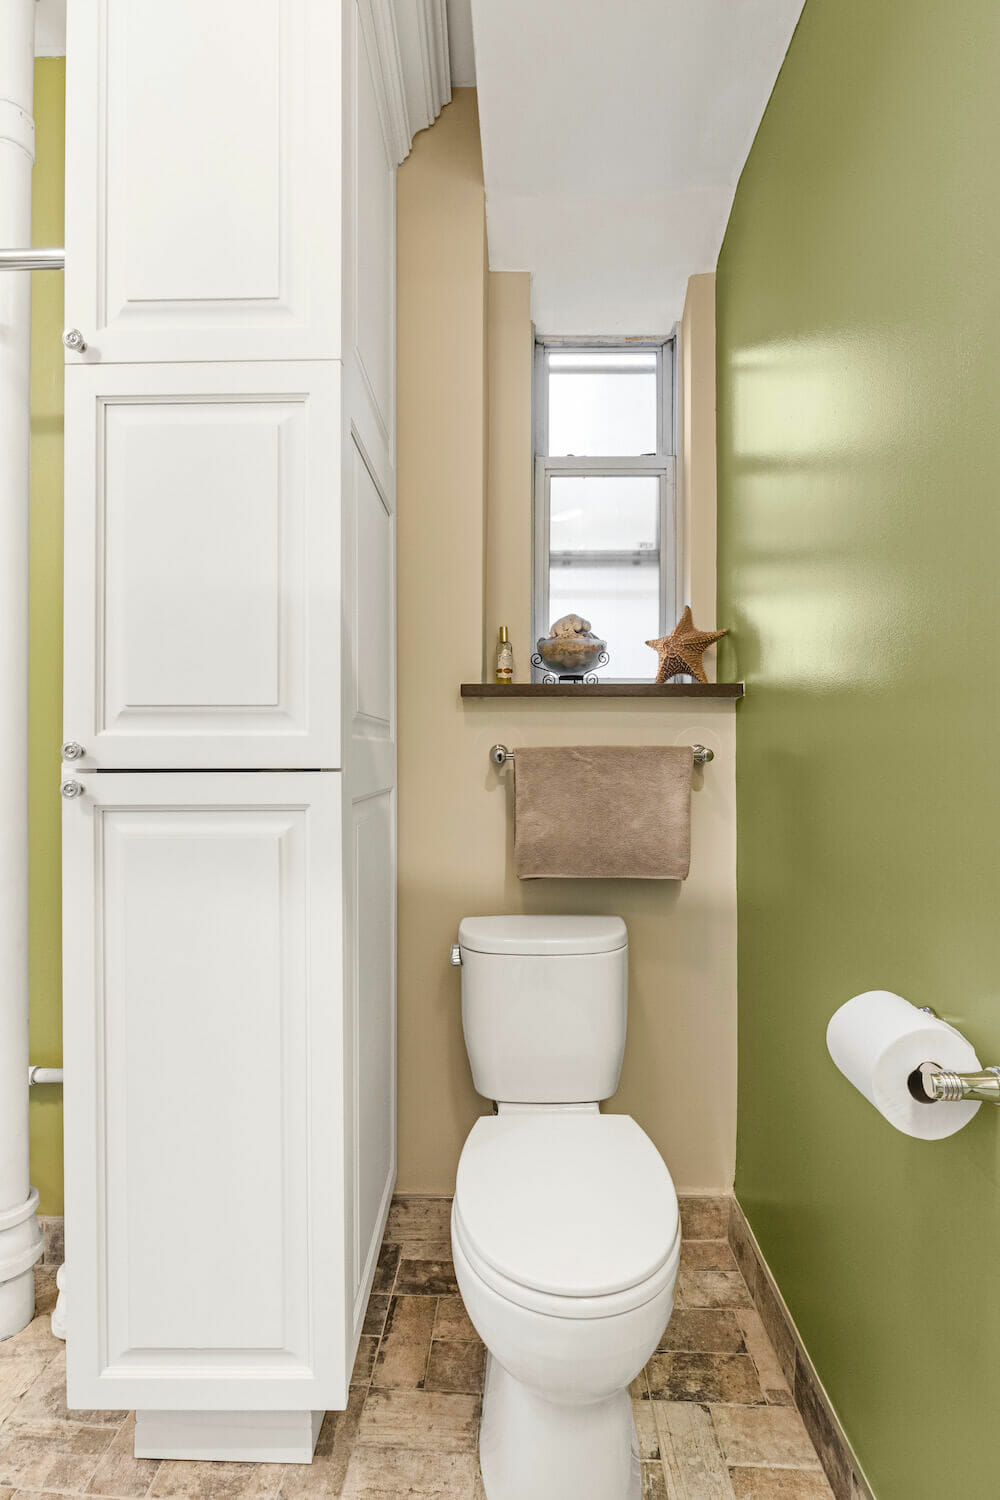 White toilet near green wall and white storage cabinetry after renovation